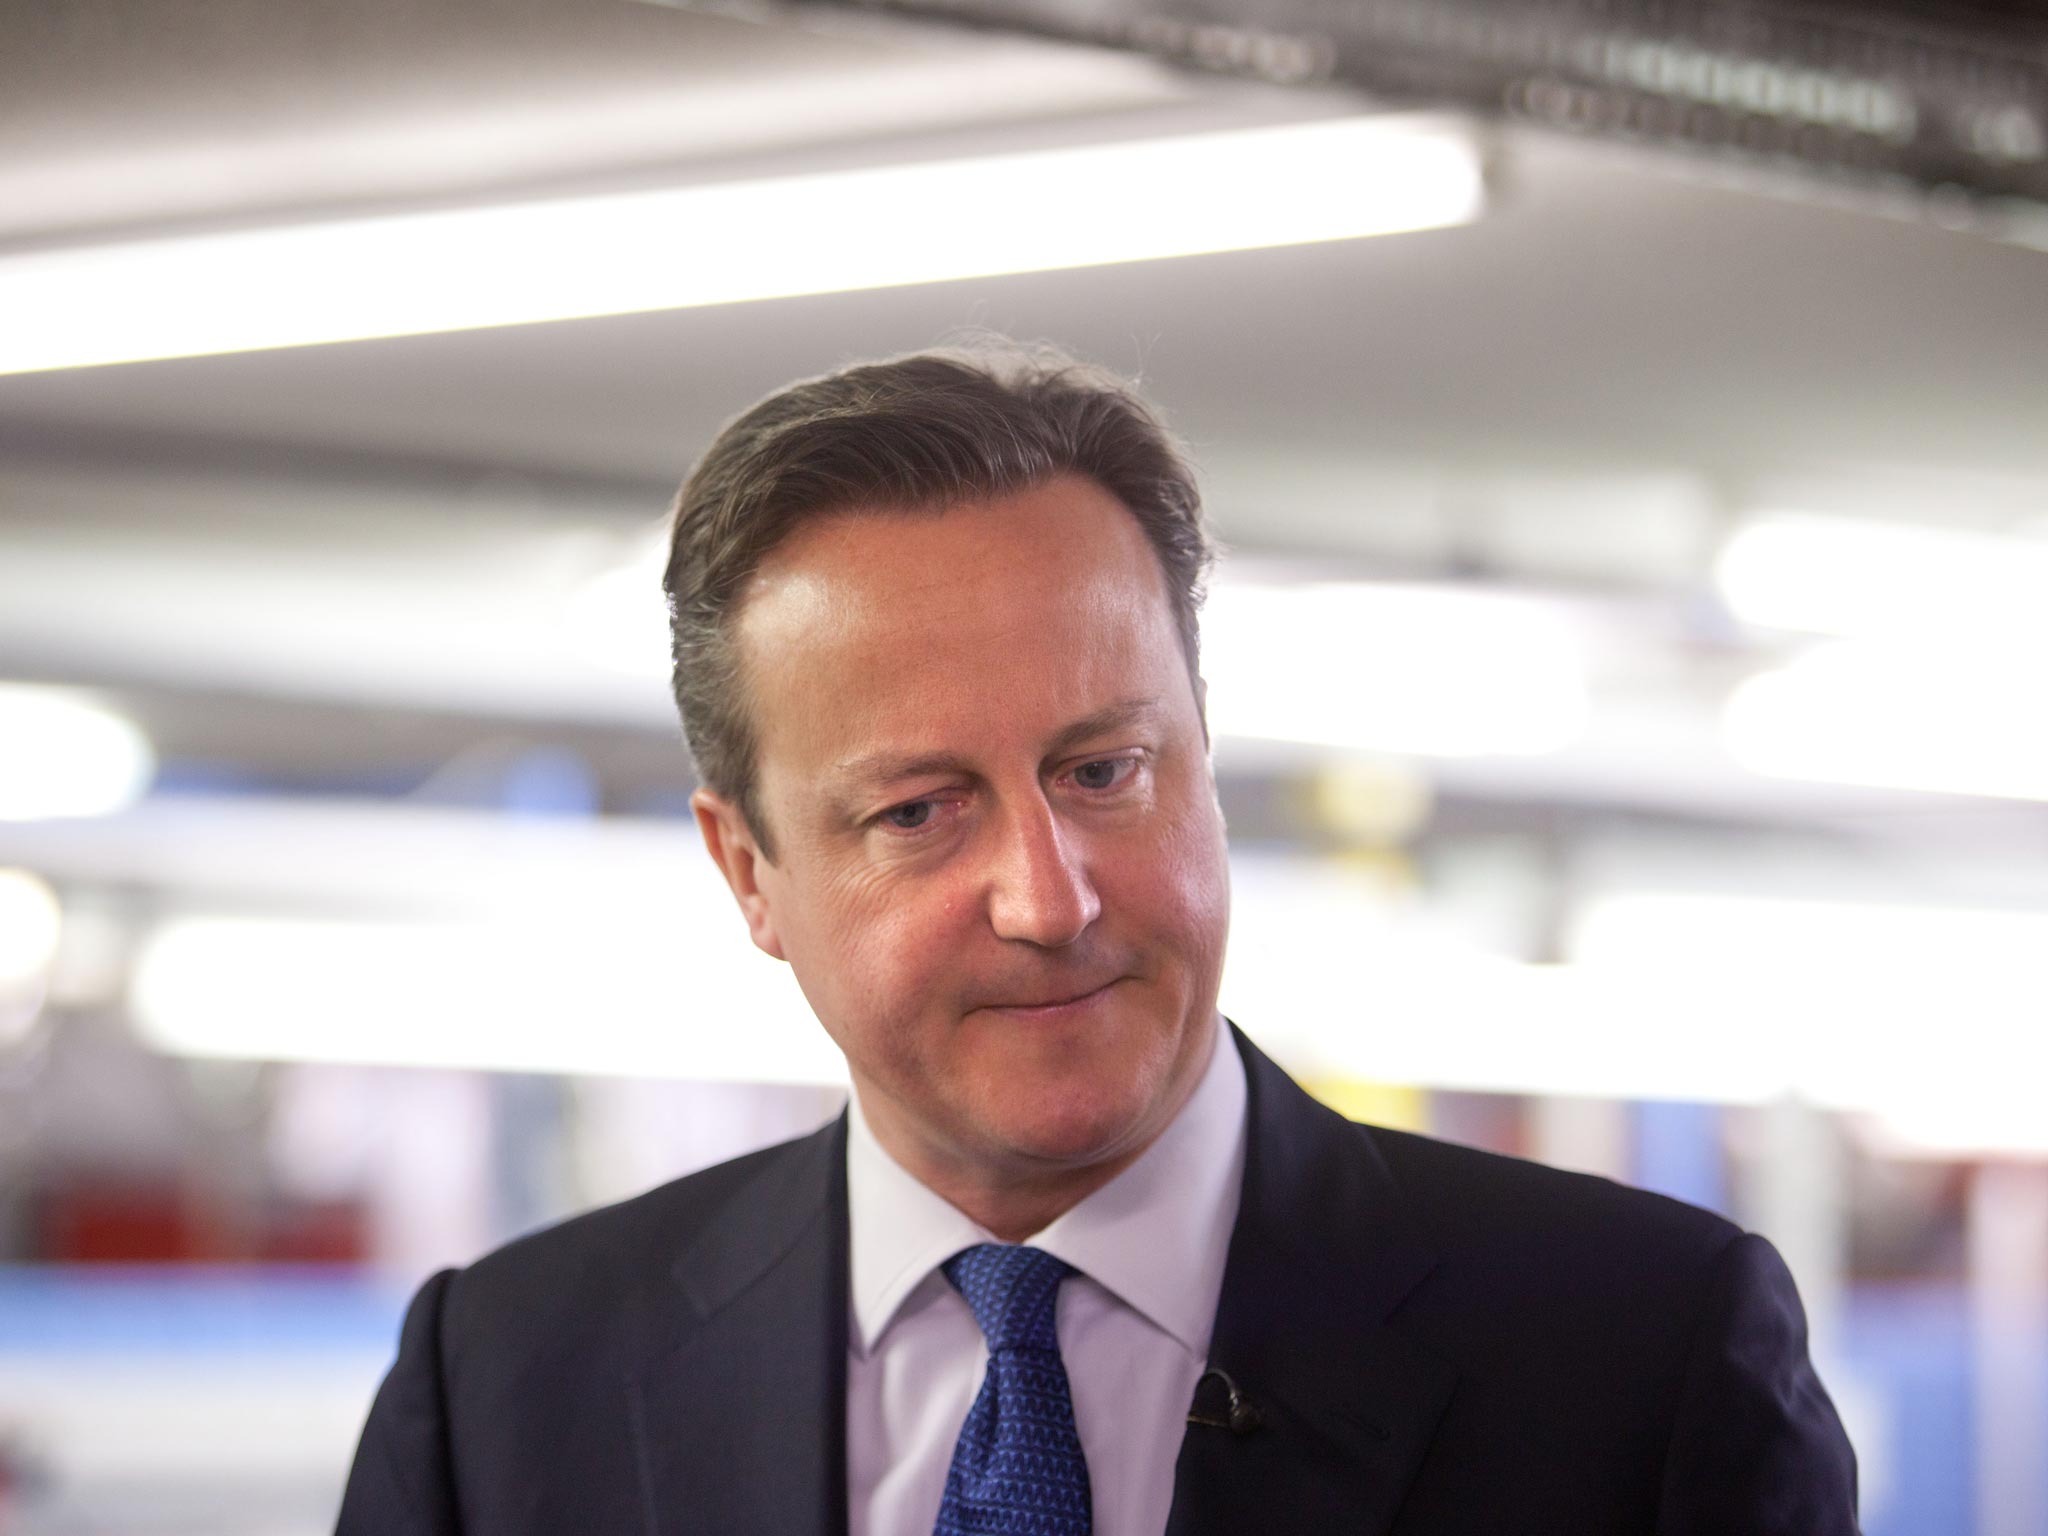 David Cameron's Big Society Network is being investigated by the Charity Commission